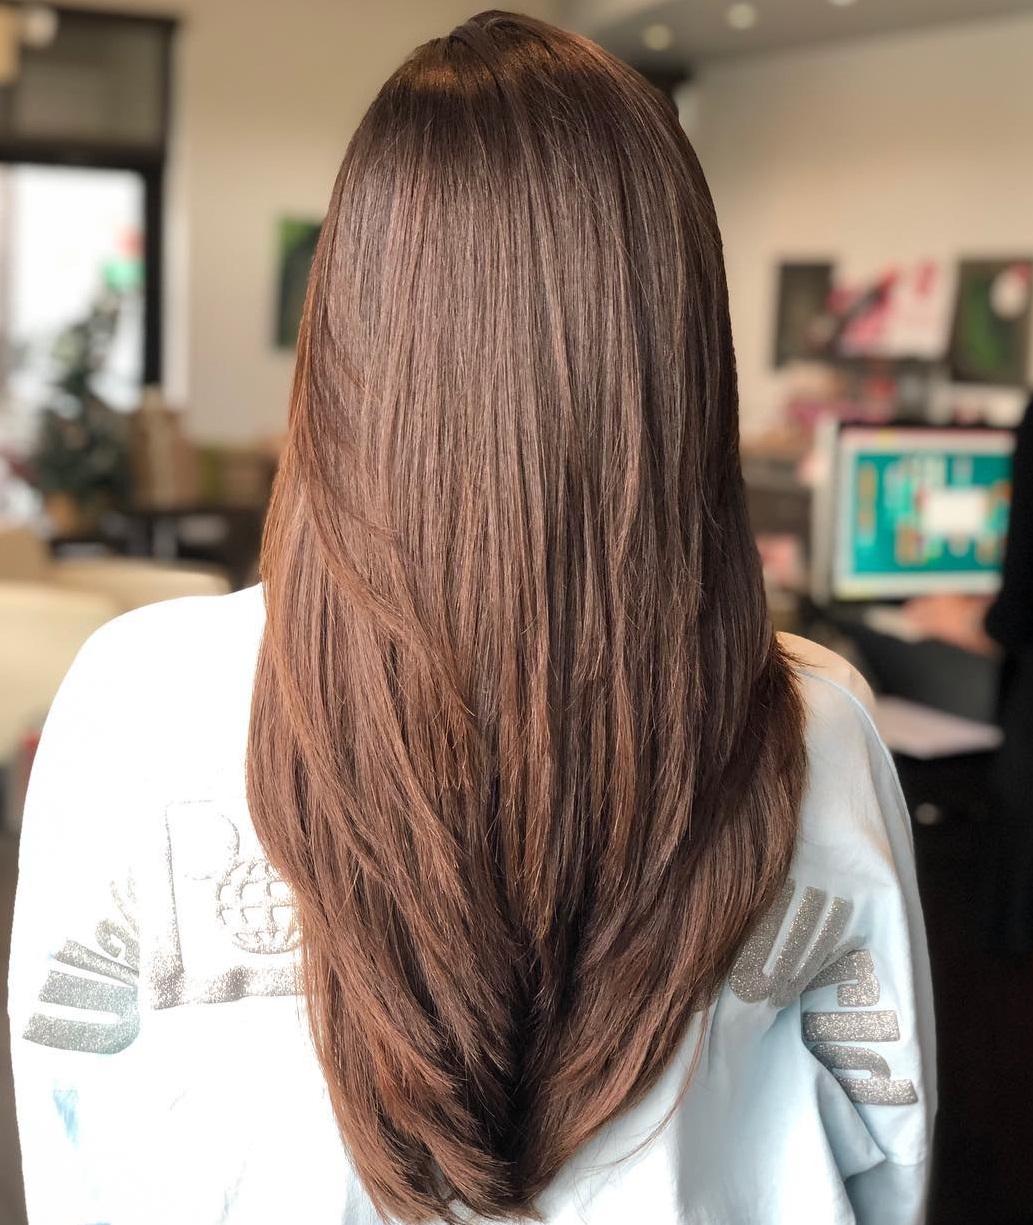 35 Stunning Long Haircuts For Women To Try In 2021 You can either make light waves or leave them straight, as indicated by your desire. 35 stunning long haircuts for women to